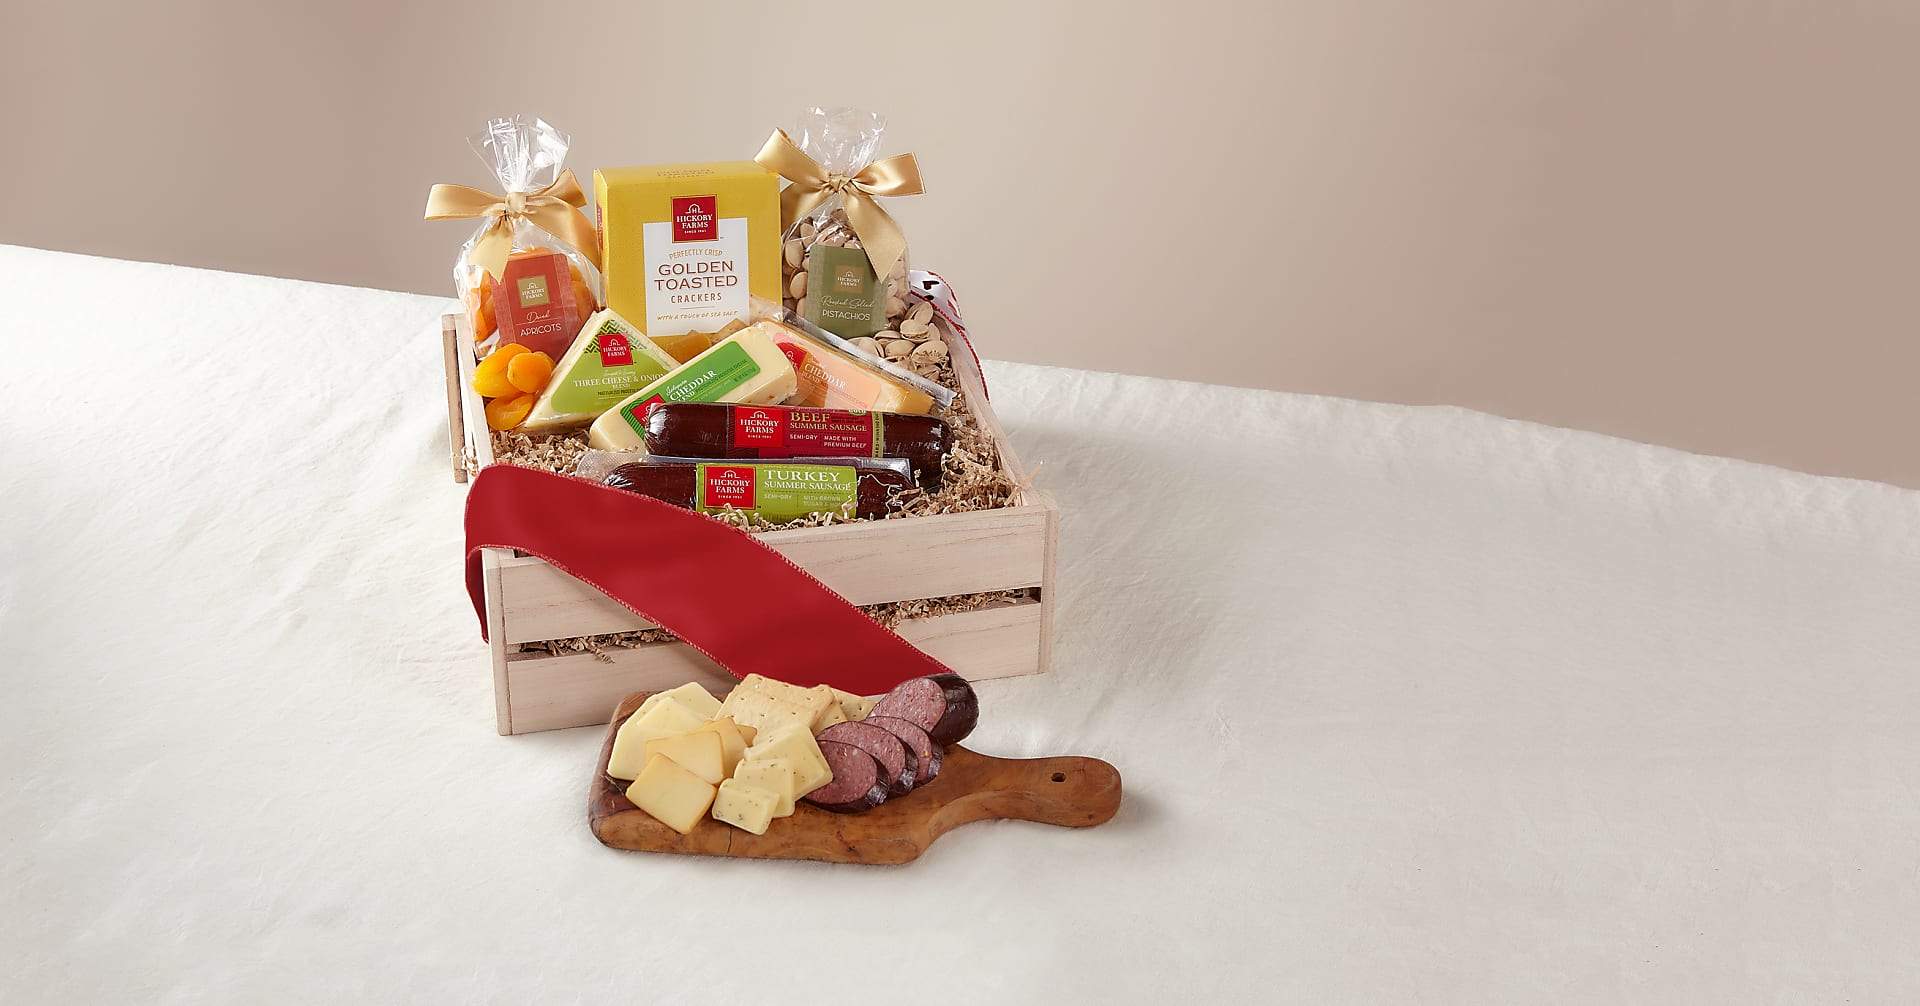 Deluxe Charcuterie Meat & Cheese Gift Basket